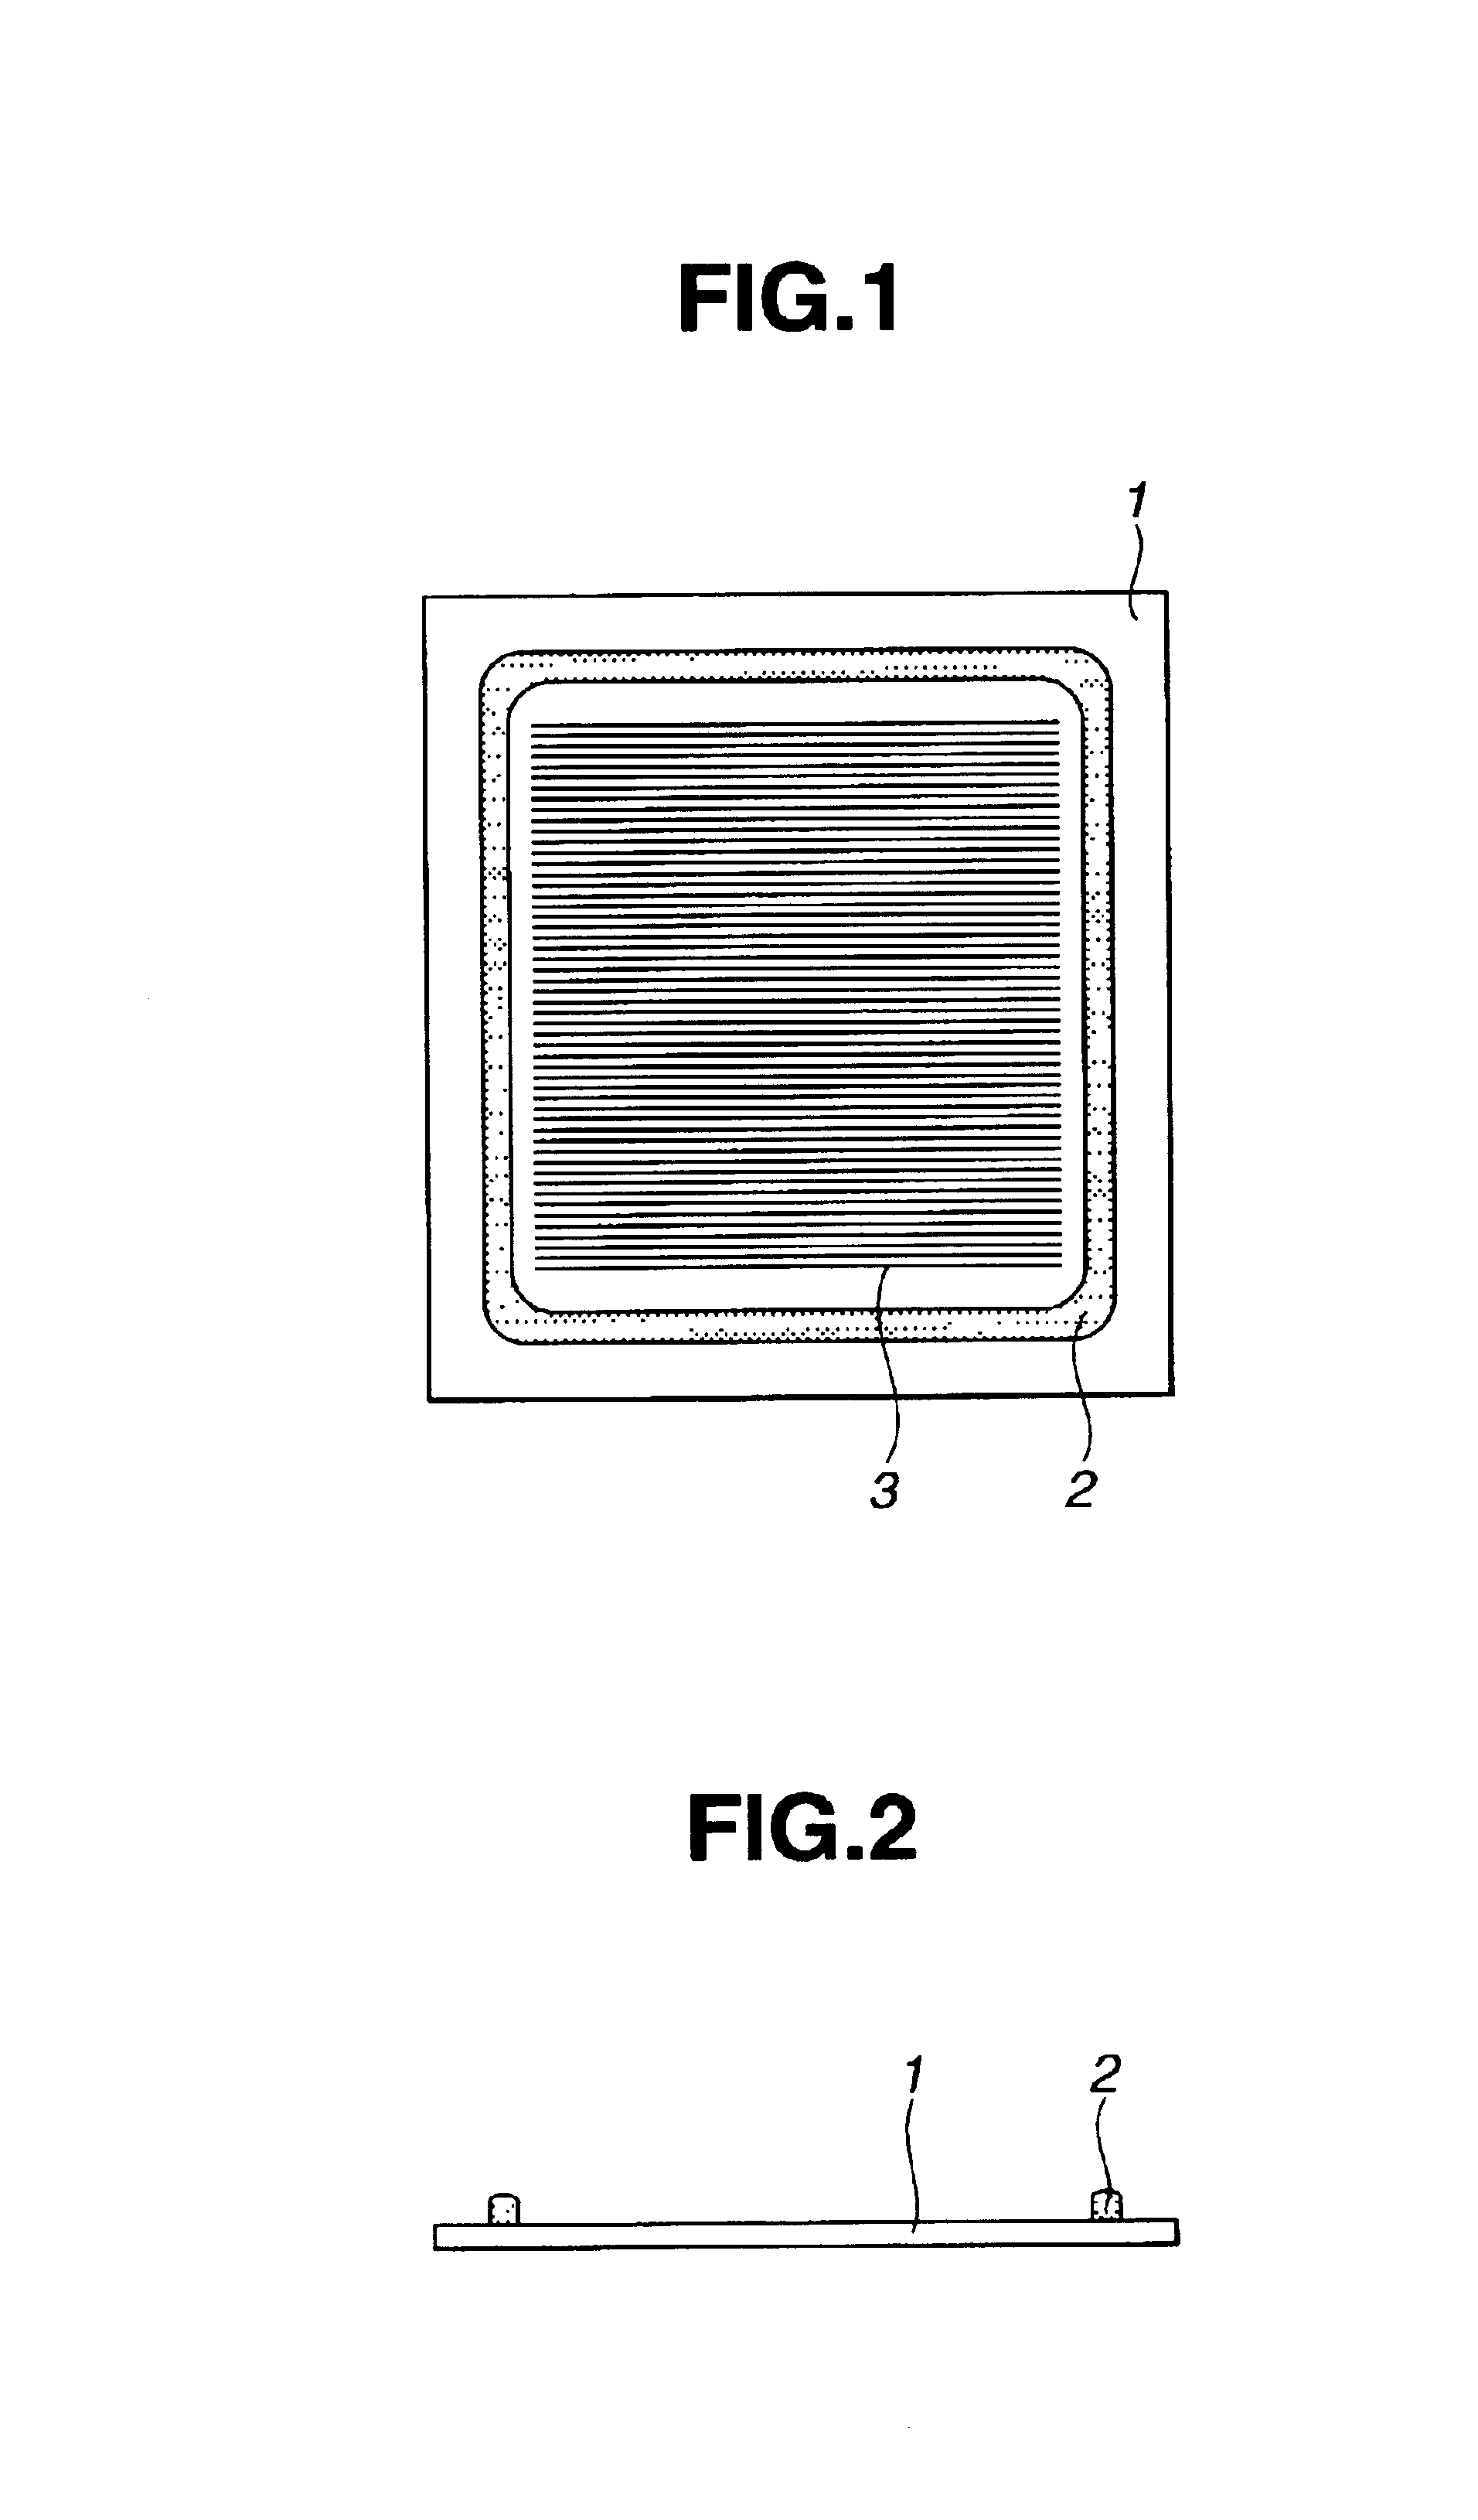 Polymer electrolyte fuel-cell separator sealing rubber composition